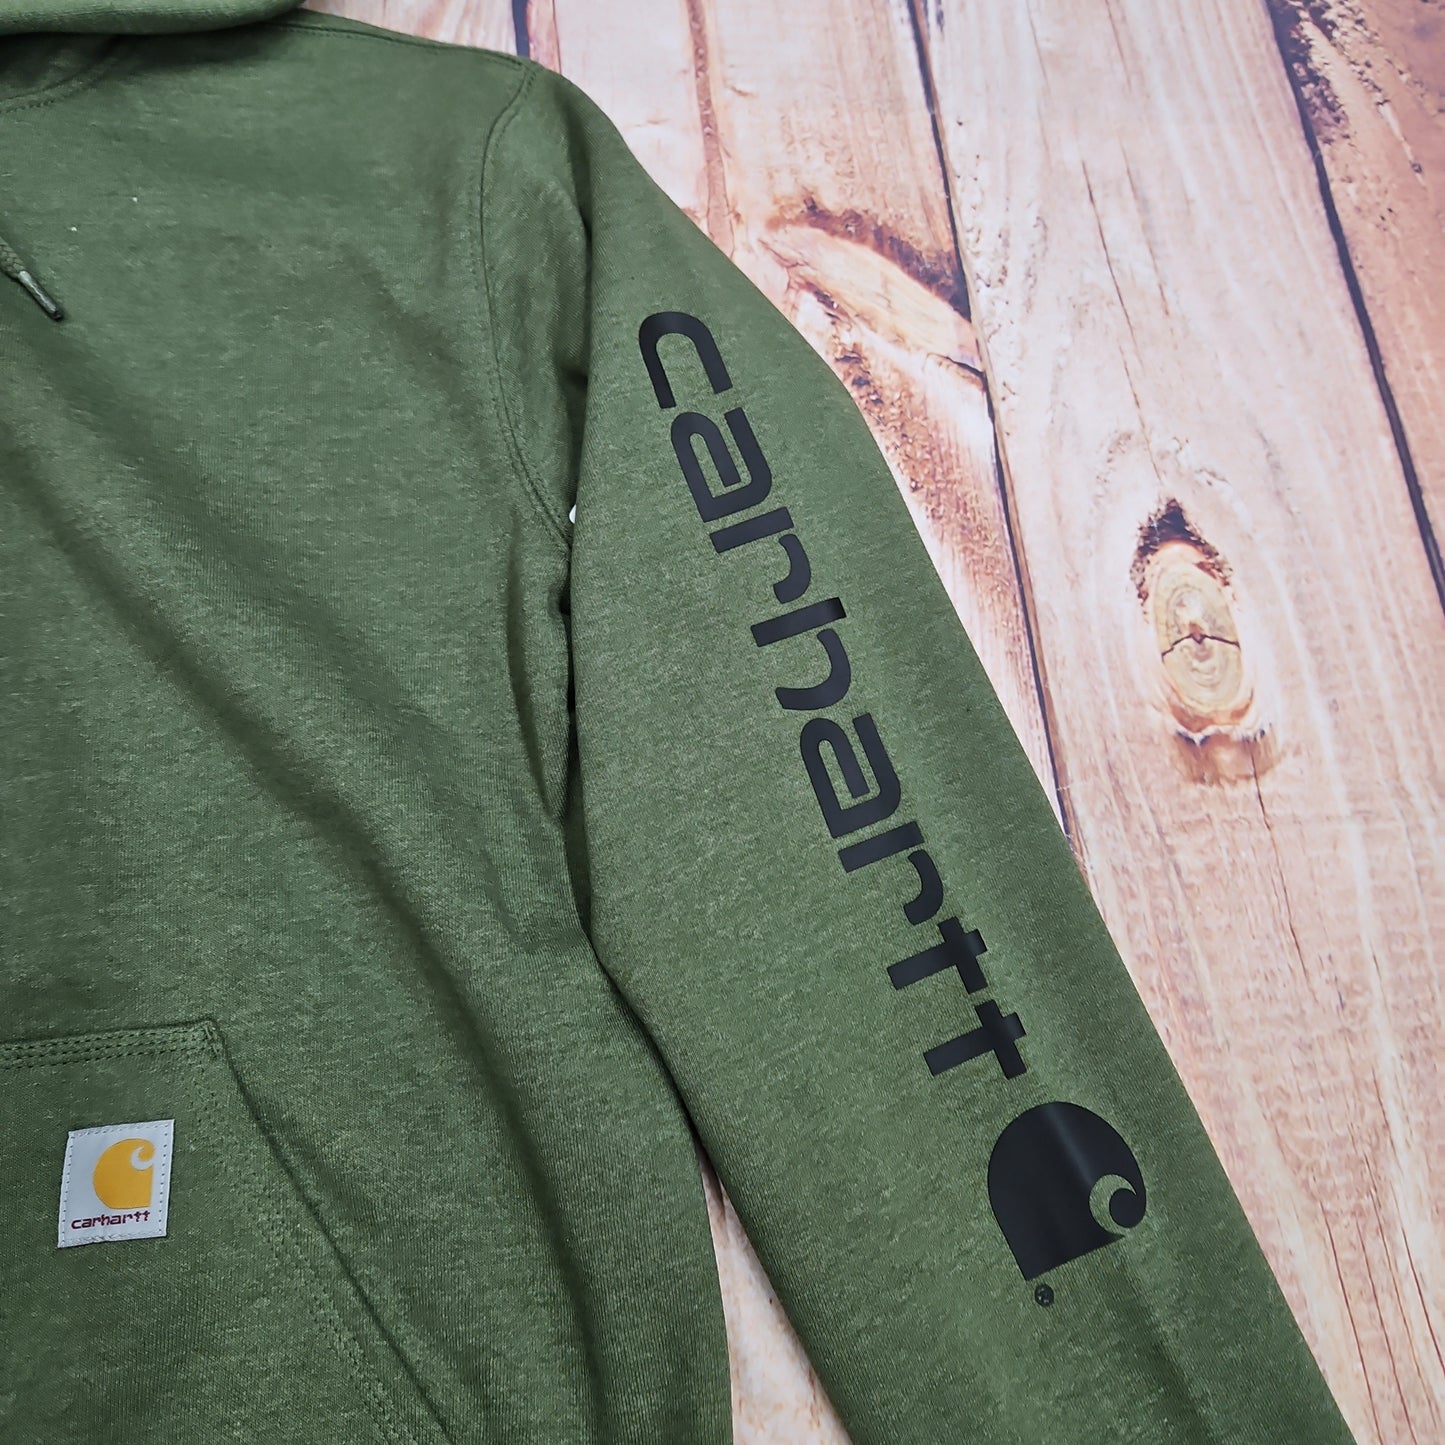 CARHARTT K288 MIDWEIGHT HOODED PULLOVER-GD4 OLIVE